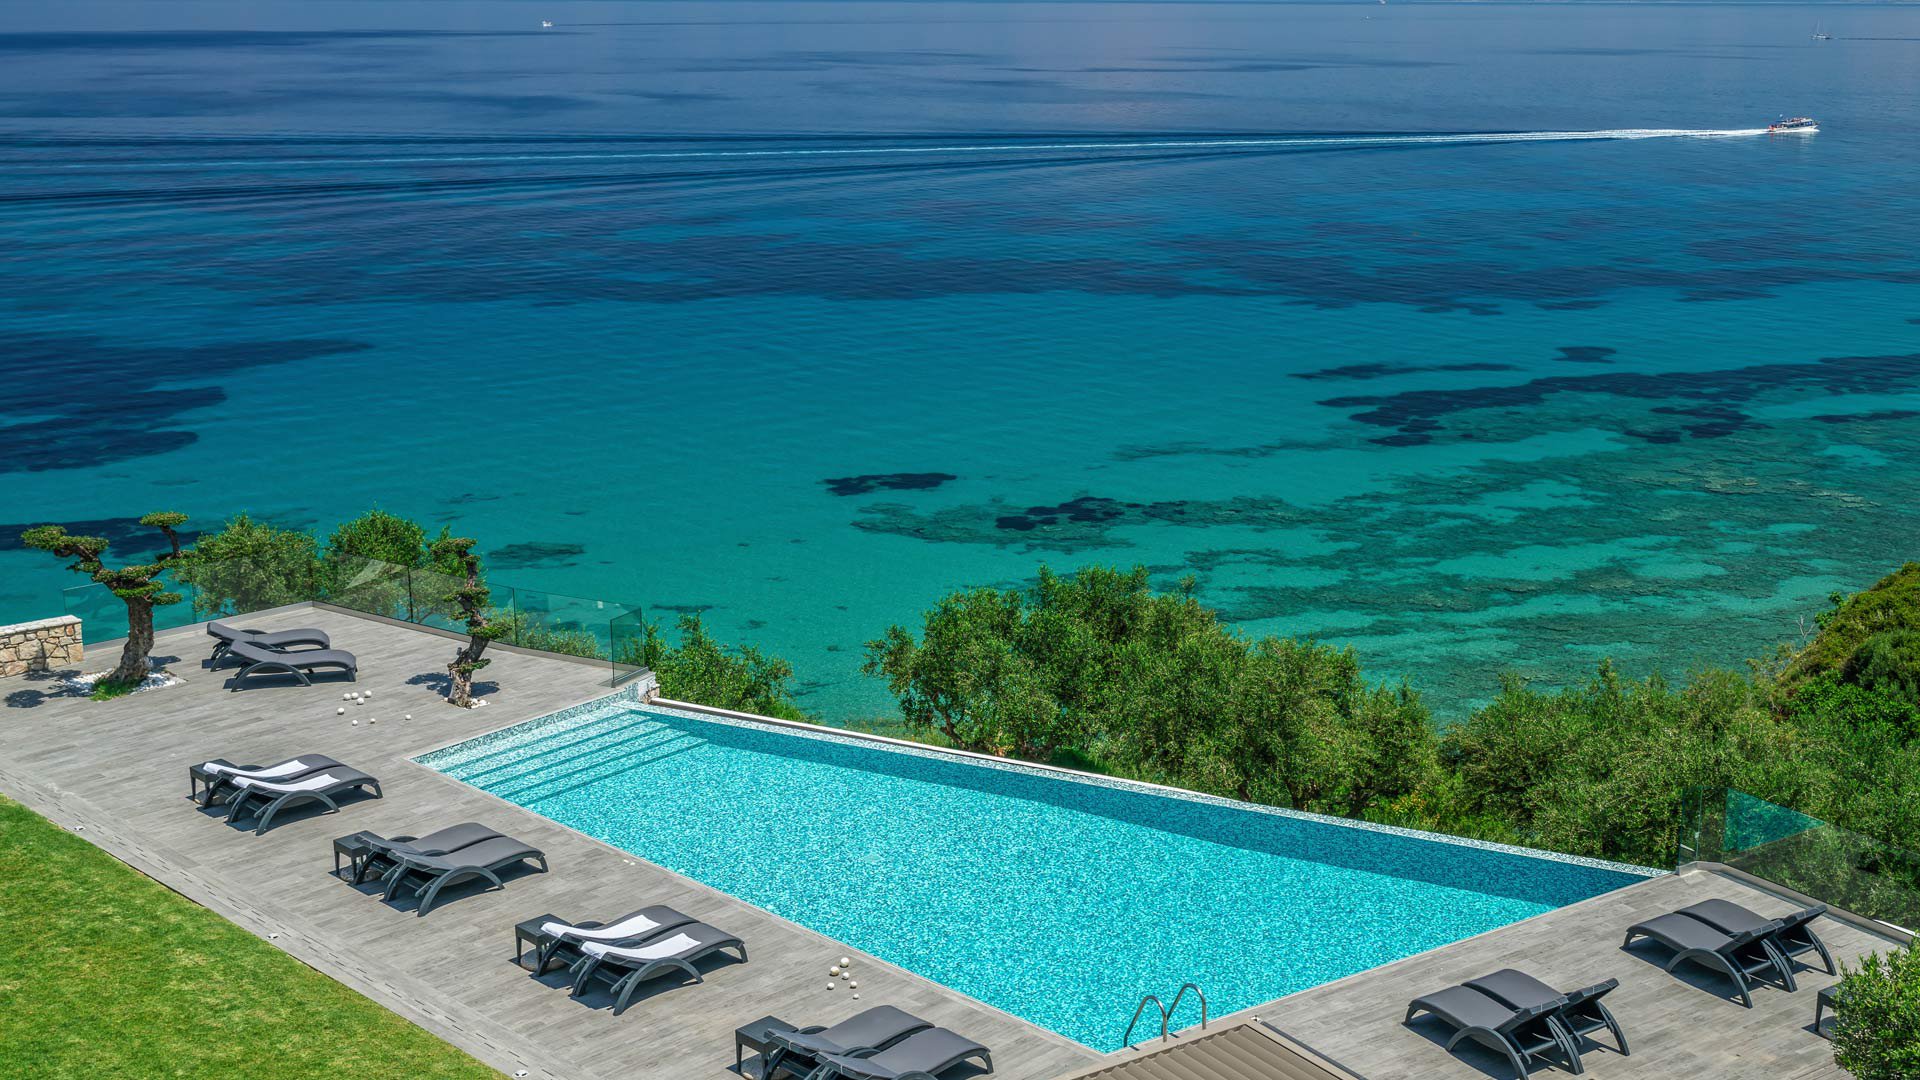 The sunbeds and the infinity pool